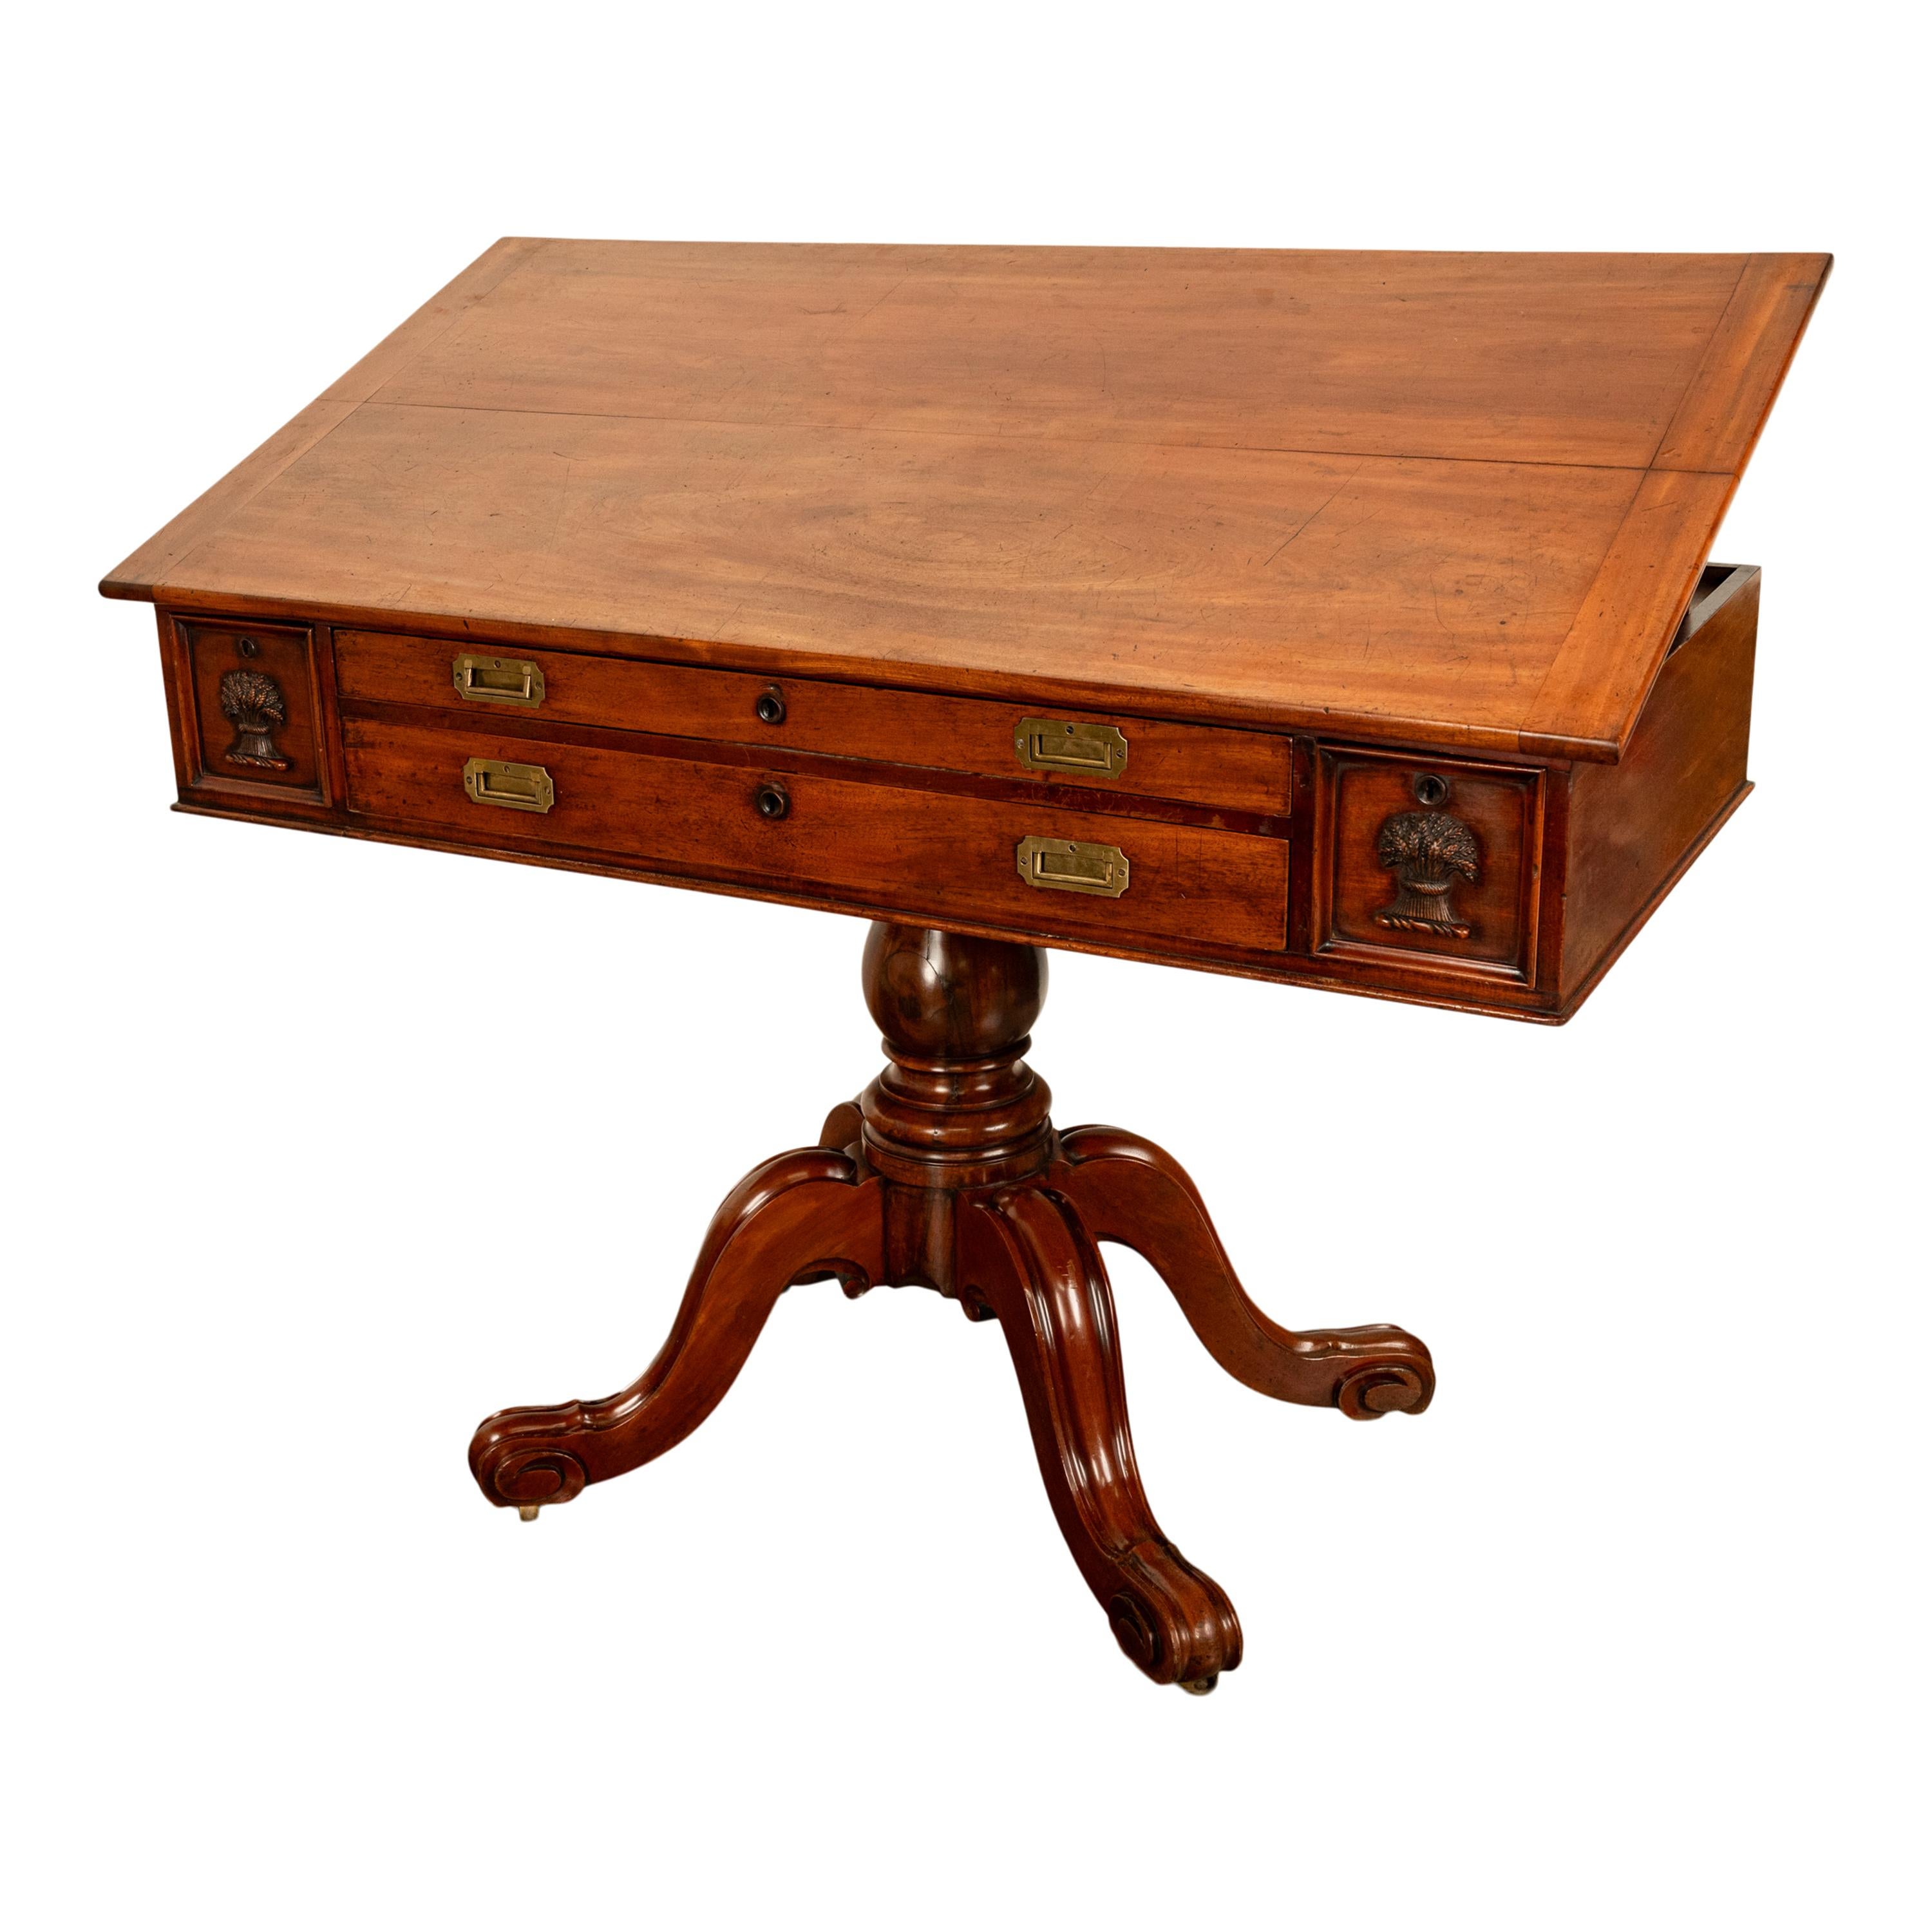 Antique 19th Century Architect's Mahogany Pedestal Desk Drafting Table 1870 For Sale